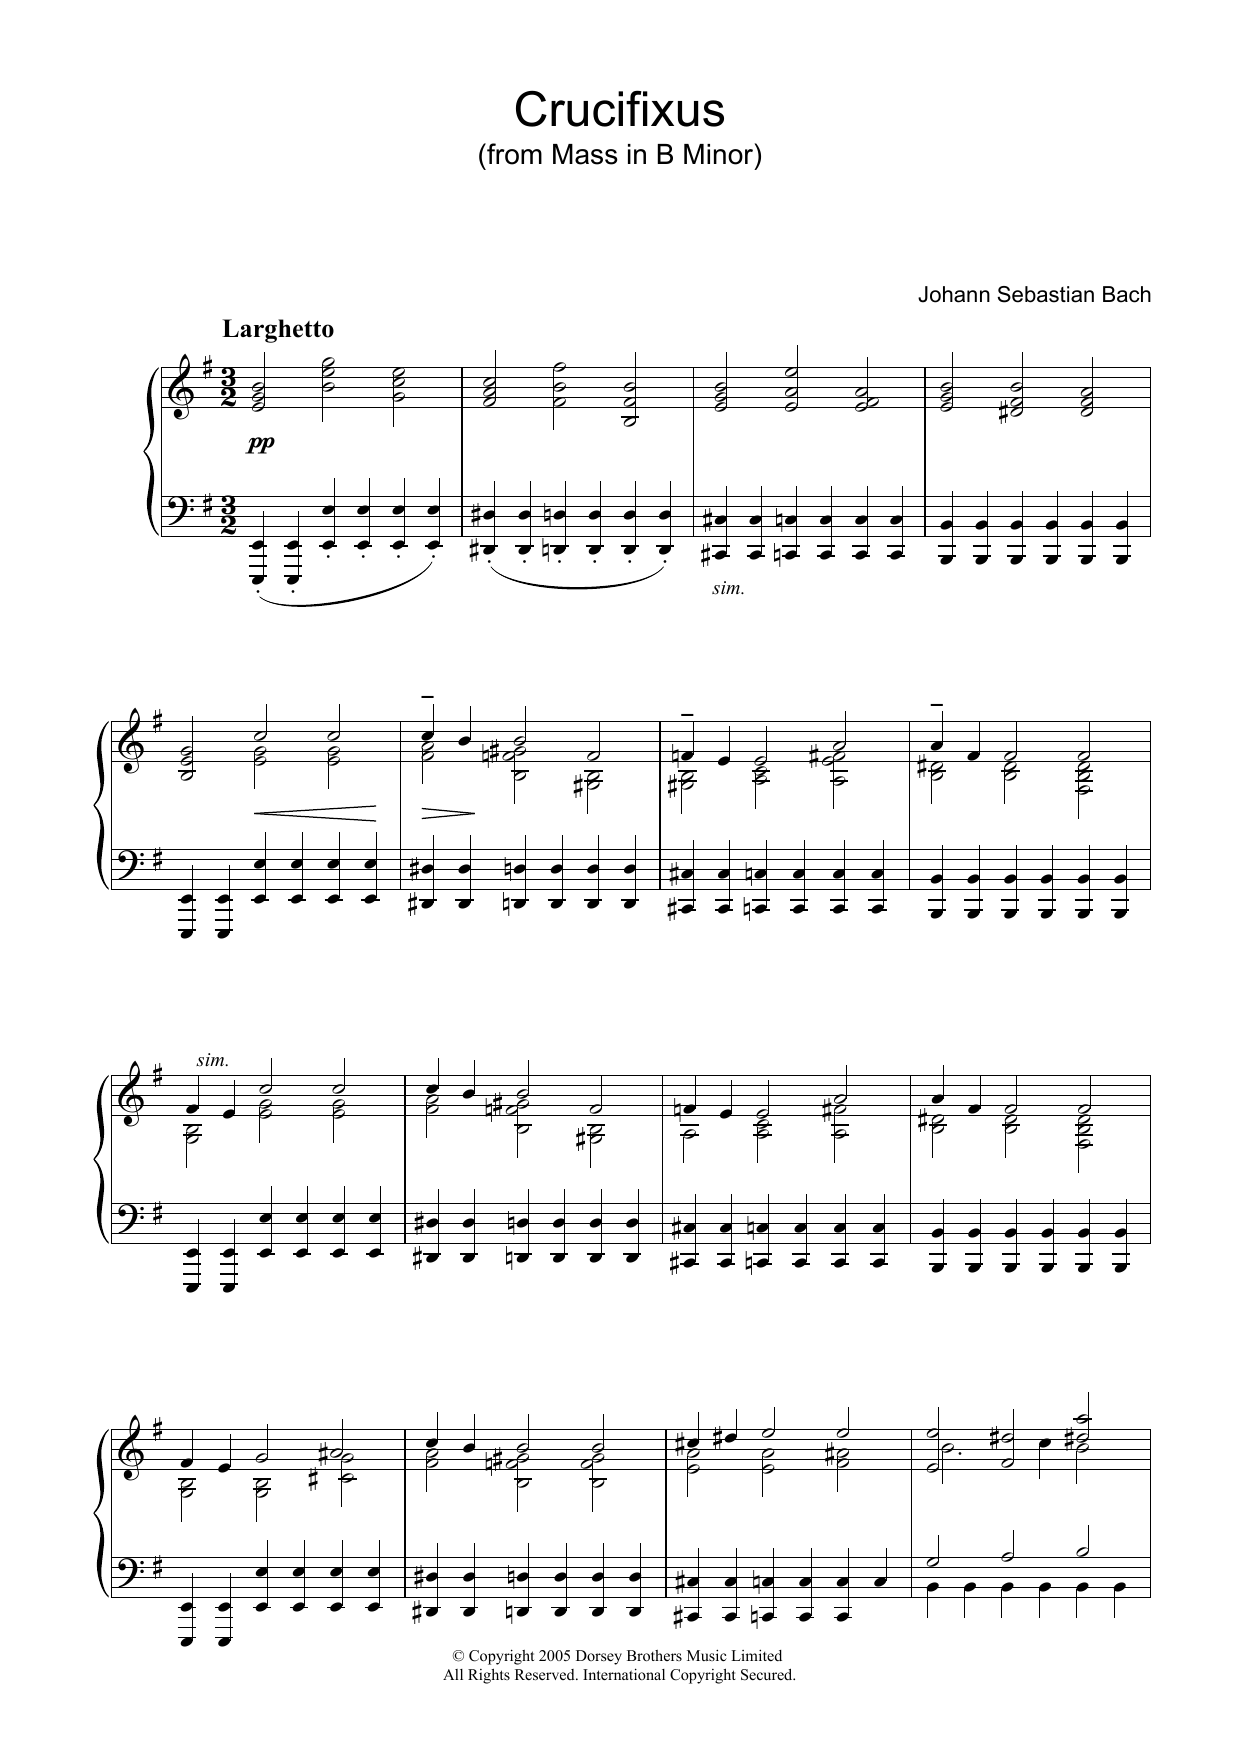 Johann Sebastian Bach Crucifixus (from Mass In B Minor) sheet music notes and chords. Download Printable PDF.